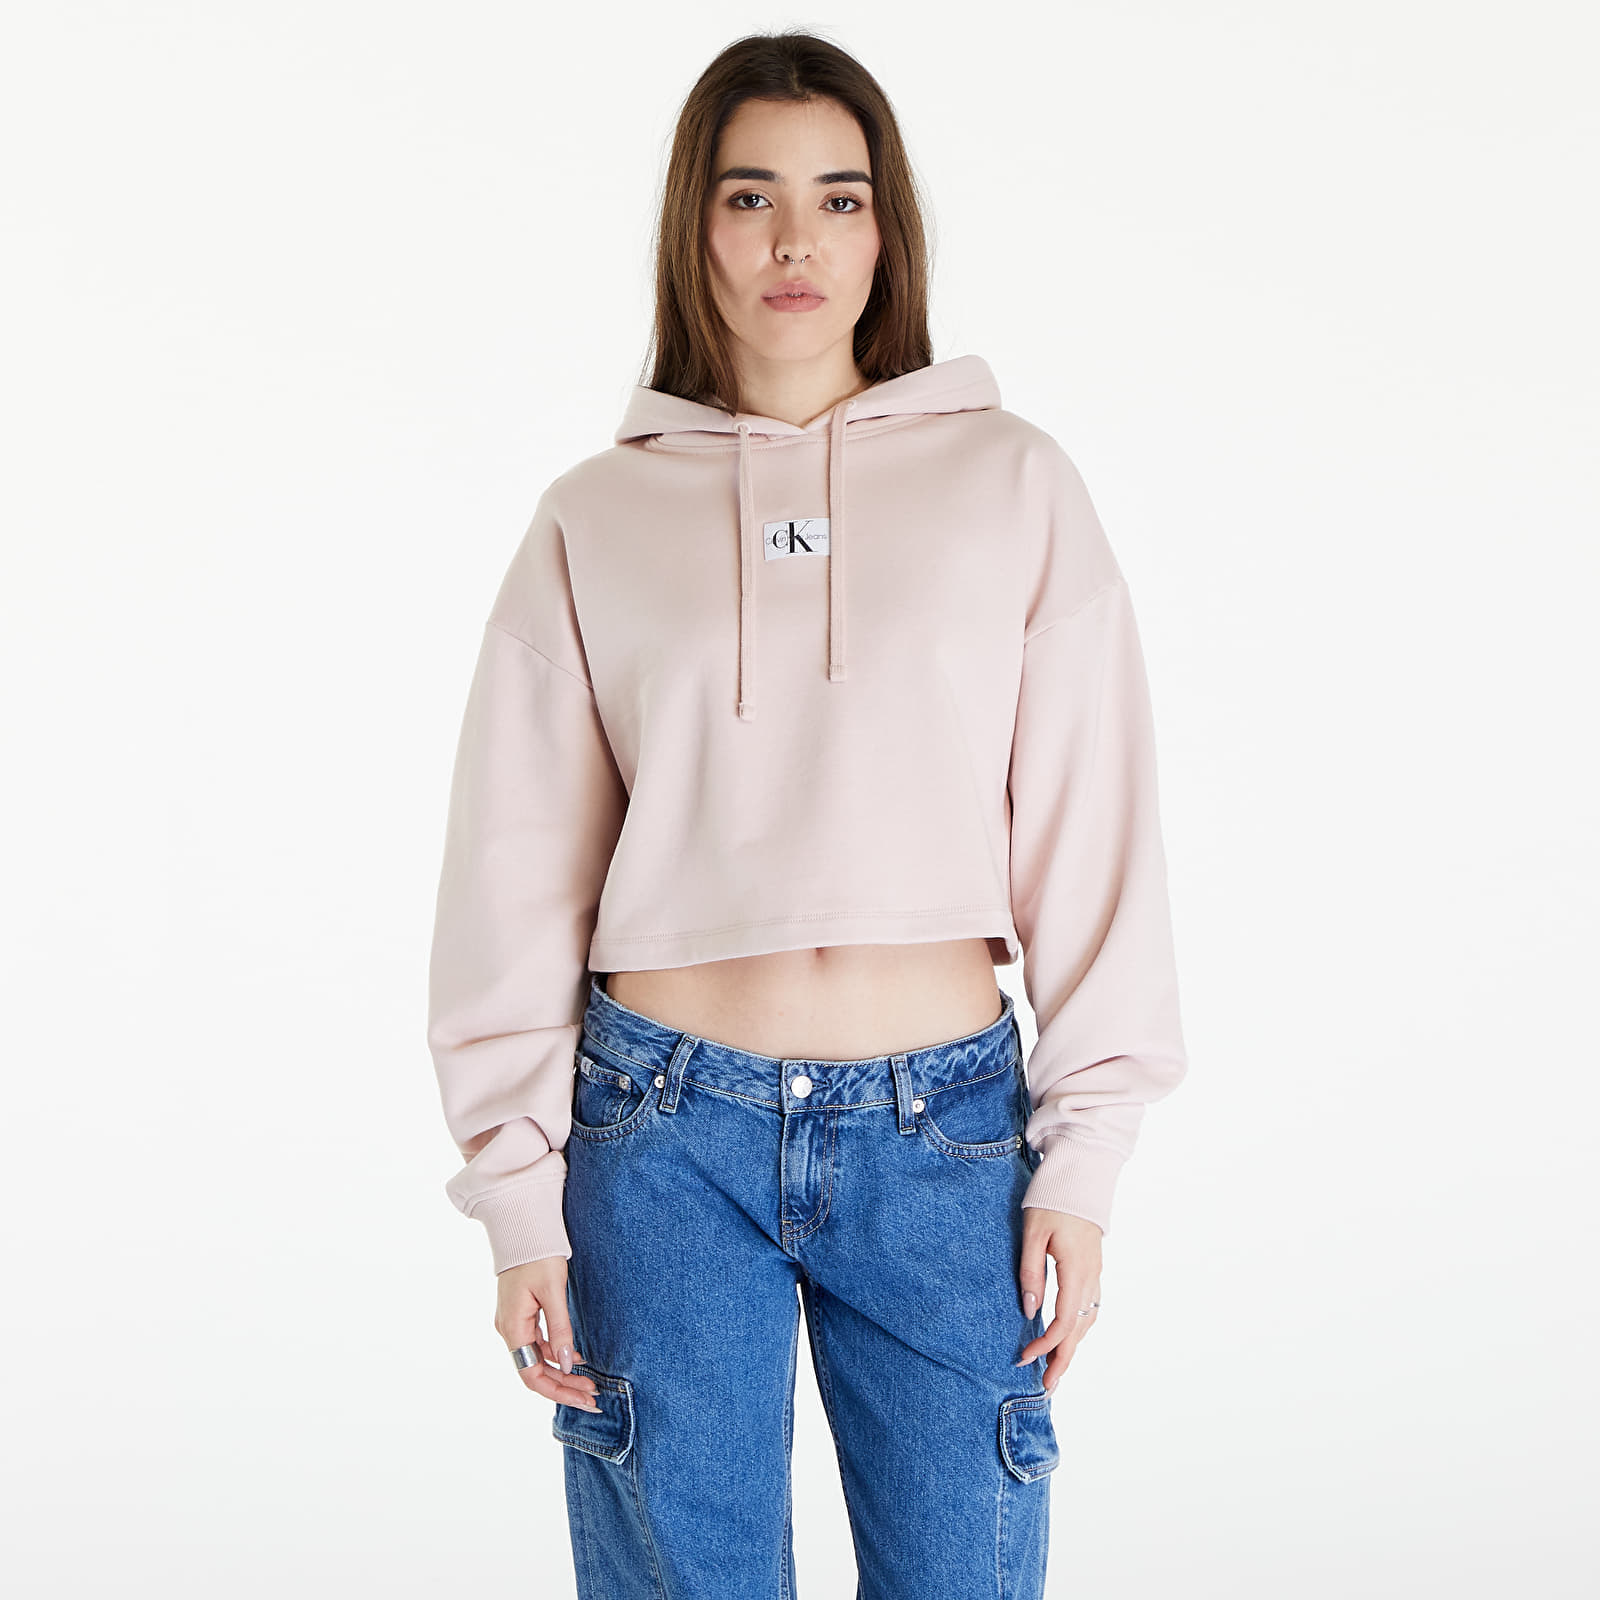 Calvin Klein - jeans woven label hoodie sepia rose